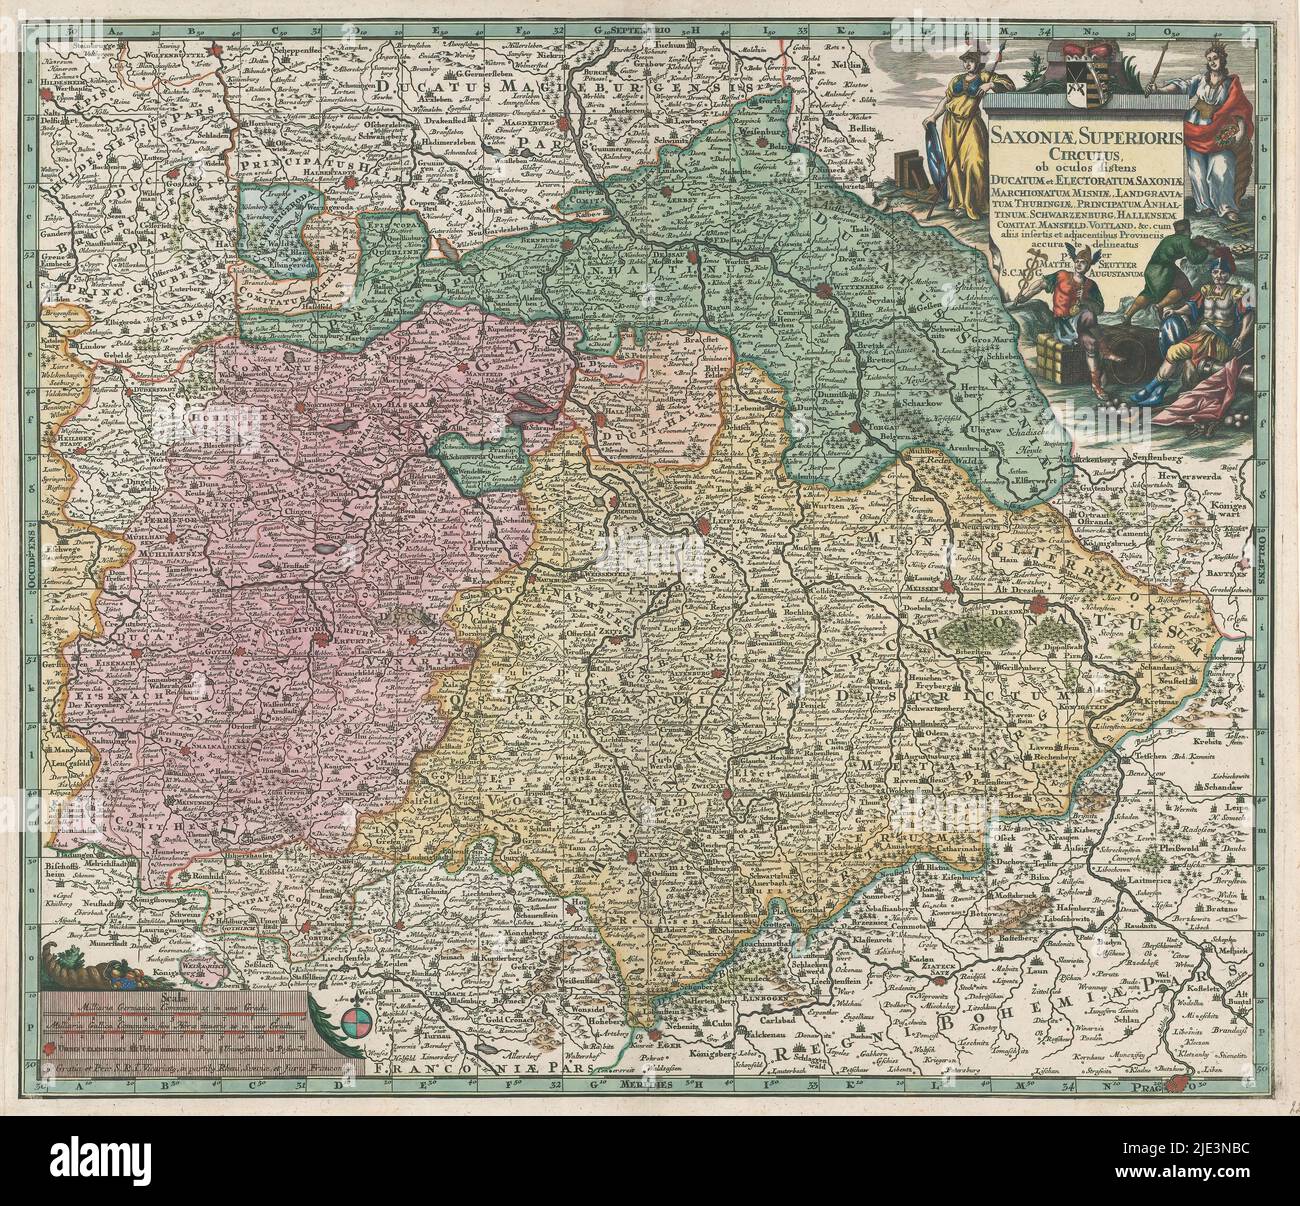 Map of the Electorate of Saxony, Saxoniae superioris circulus ob oculos sistens ducatum et electoratum (...) (title on object), Around the title cartouche an allegorical representation with above the coat of arms of Saxony., print maker: anonymous, publisher: Matthaeus Seutter (III), (mentioned on object), unknown, (mentioned on object), Augsburg, 1757 - 1777, paper, engraving, height 505 mm × width 589 mm Stock Photo